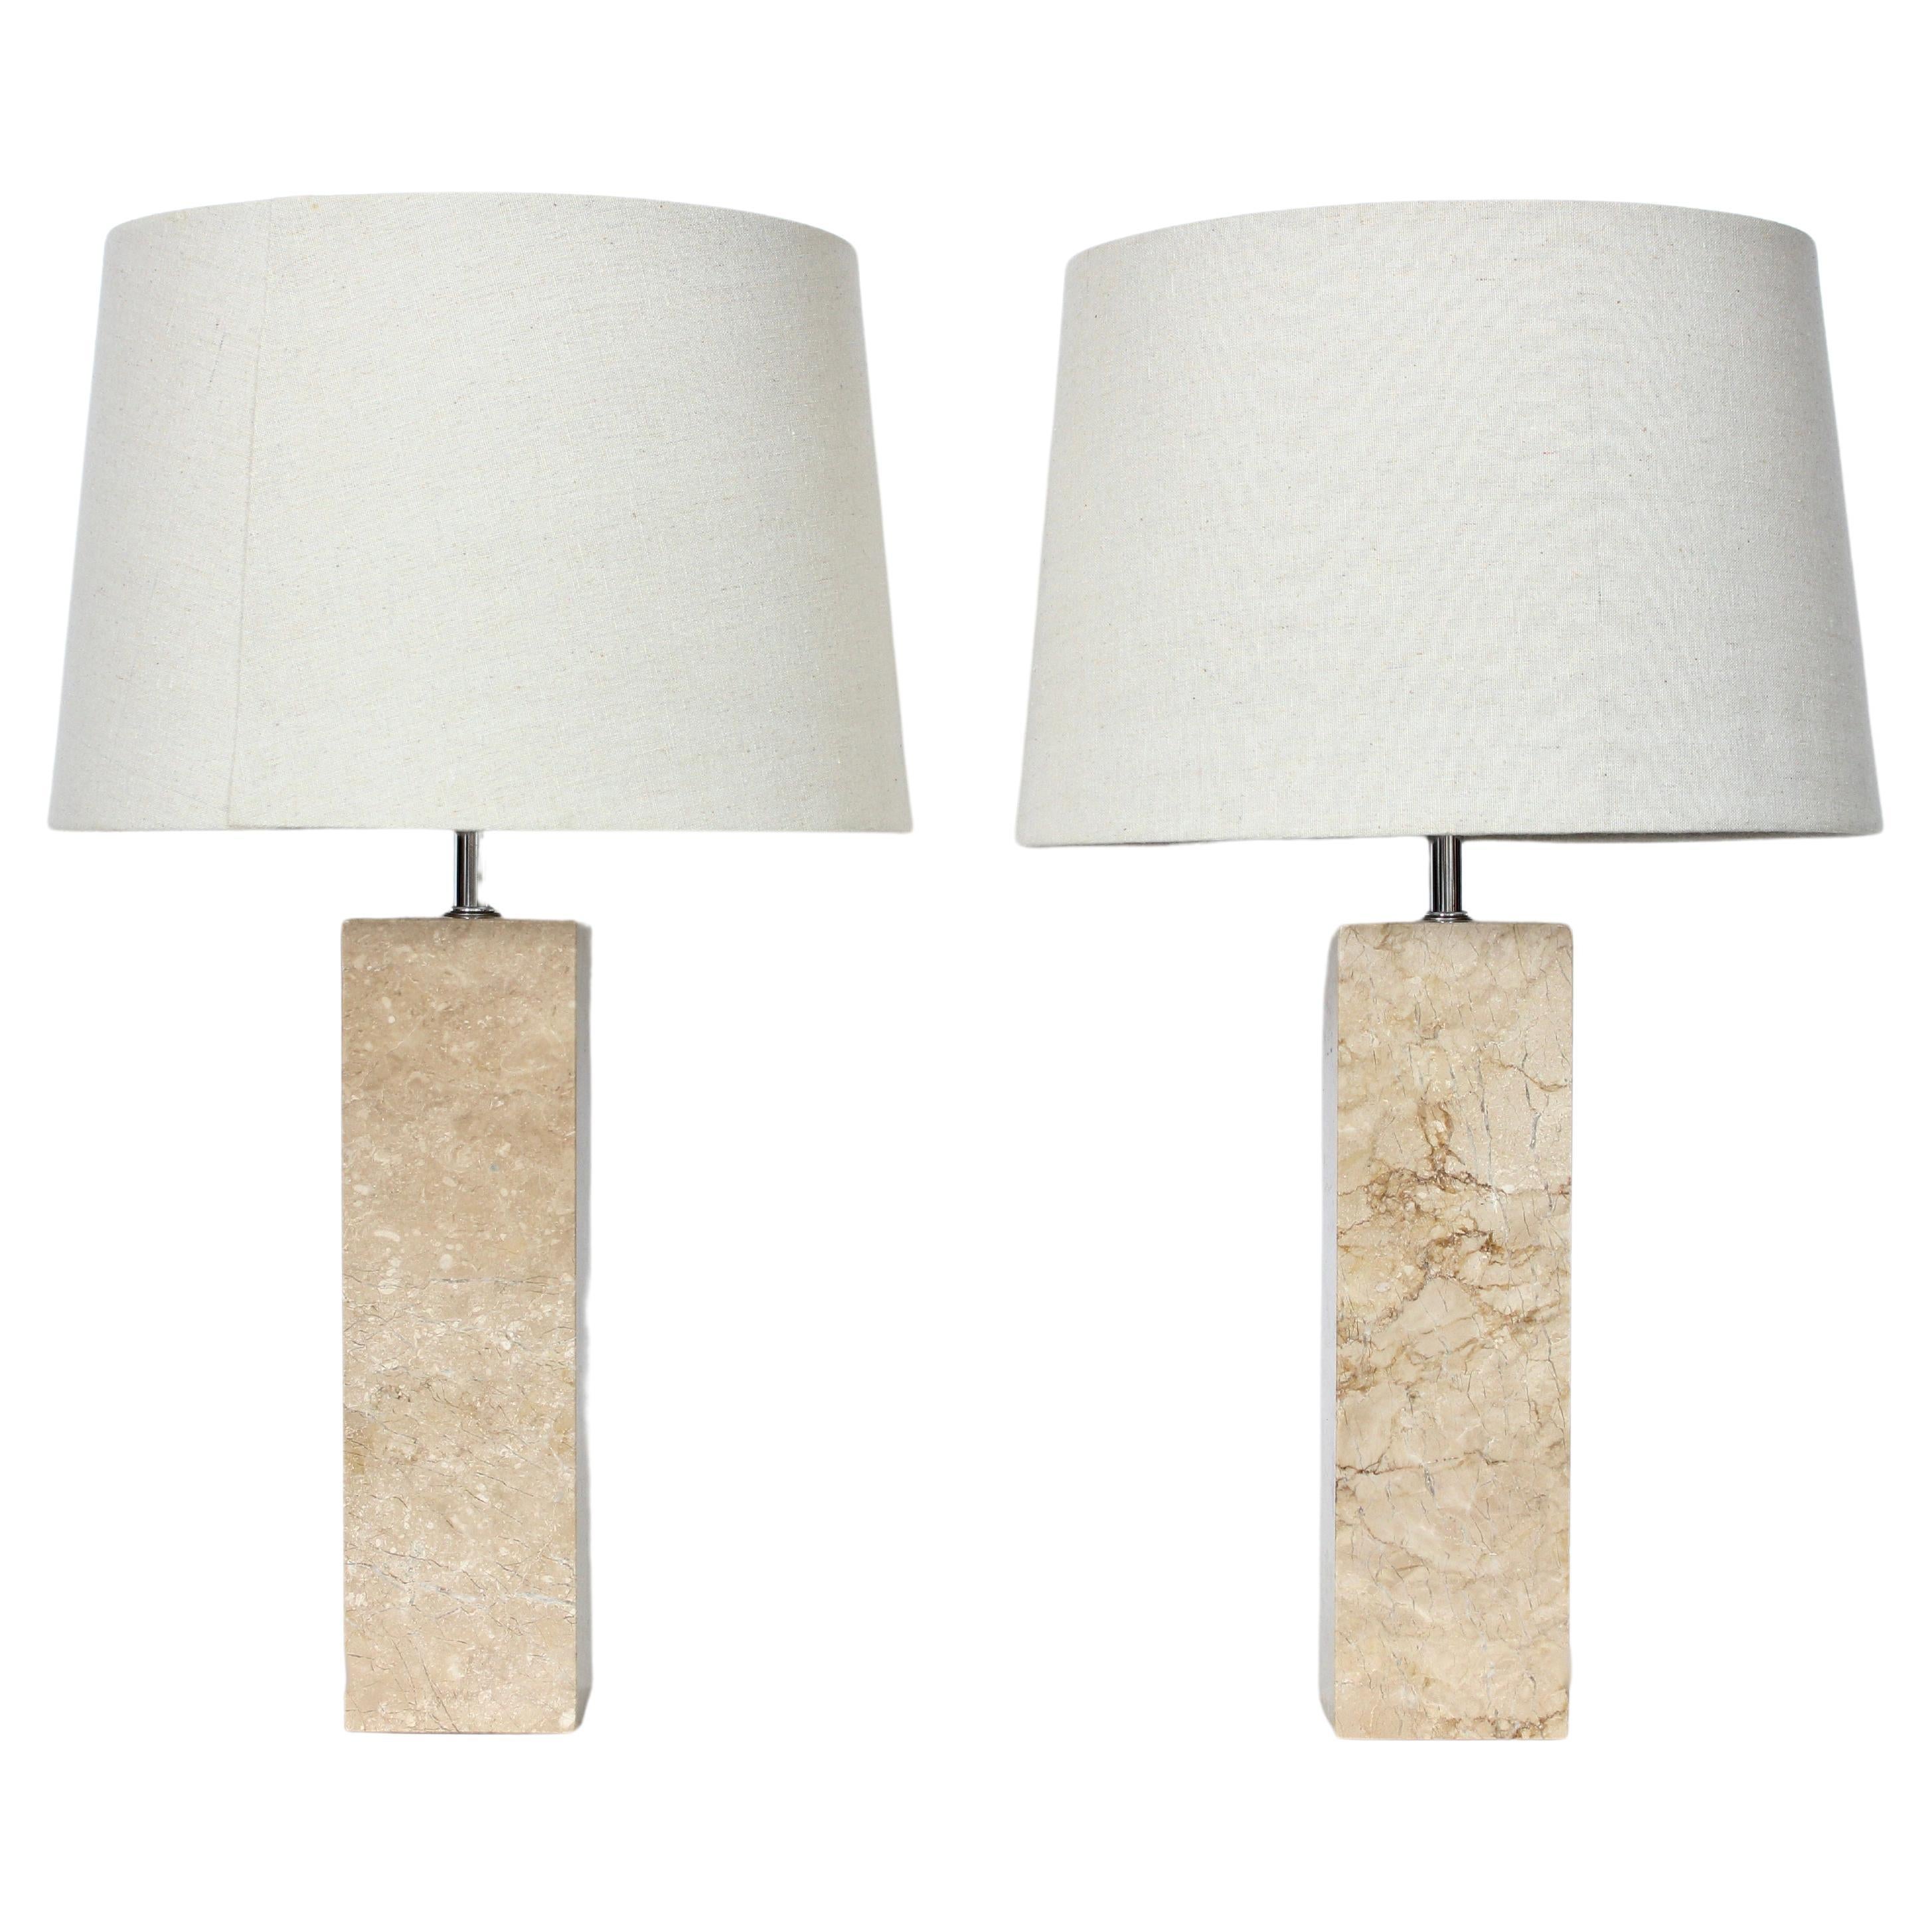 Pair of George Kovacs Beige Solid Travertine Table Lamps, 1970's